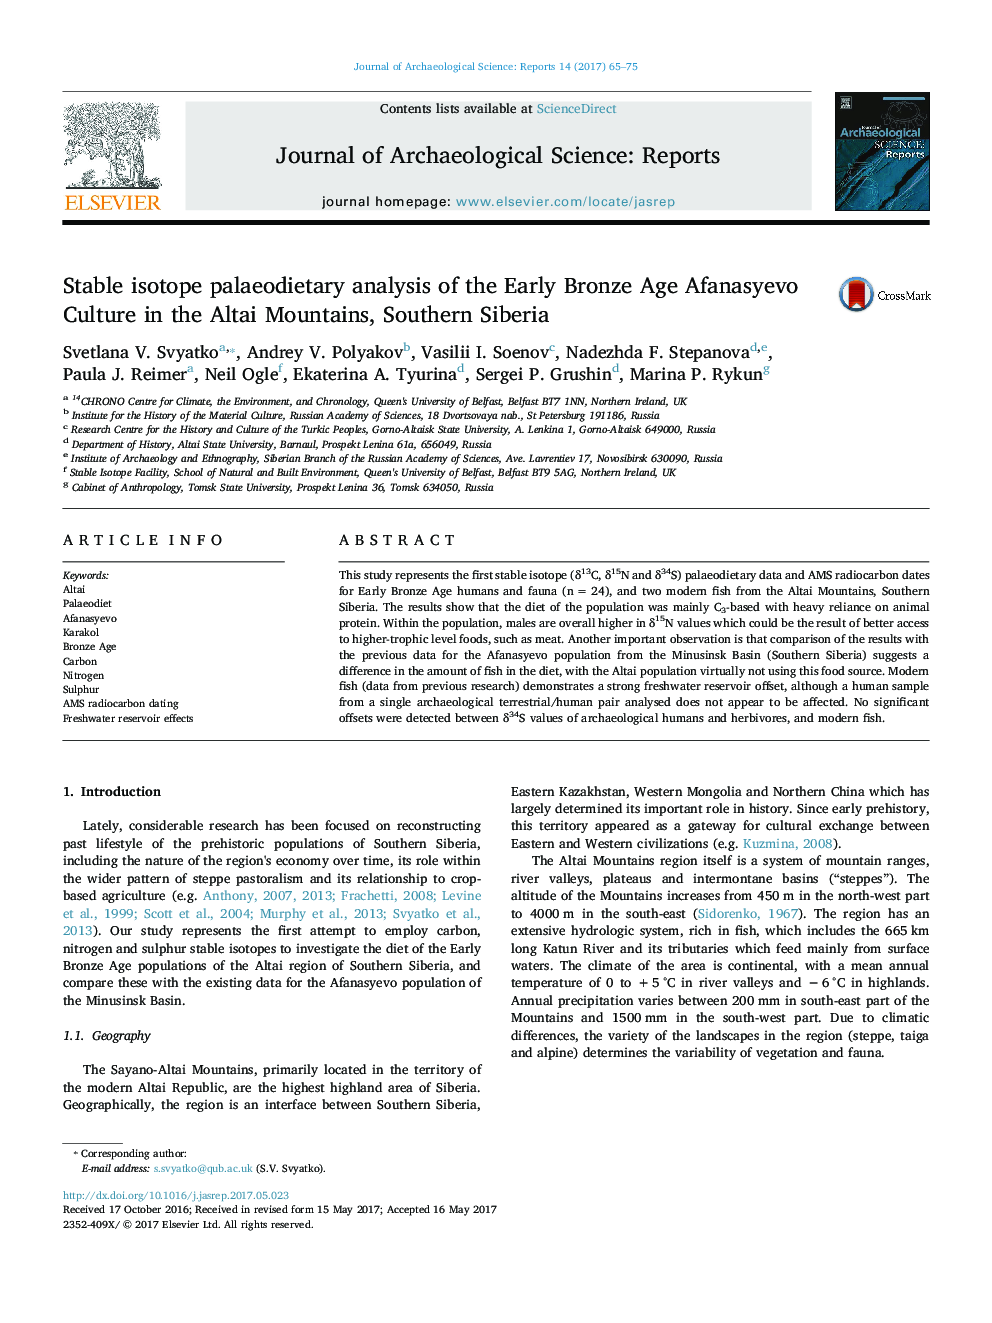 Stable isotope palaeodietary analysis of the Early Bronze Age Afanasyevo Culture in the Altai Mountains, Southern Siberia